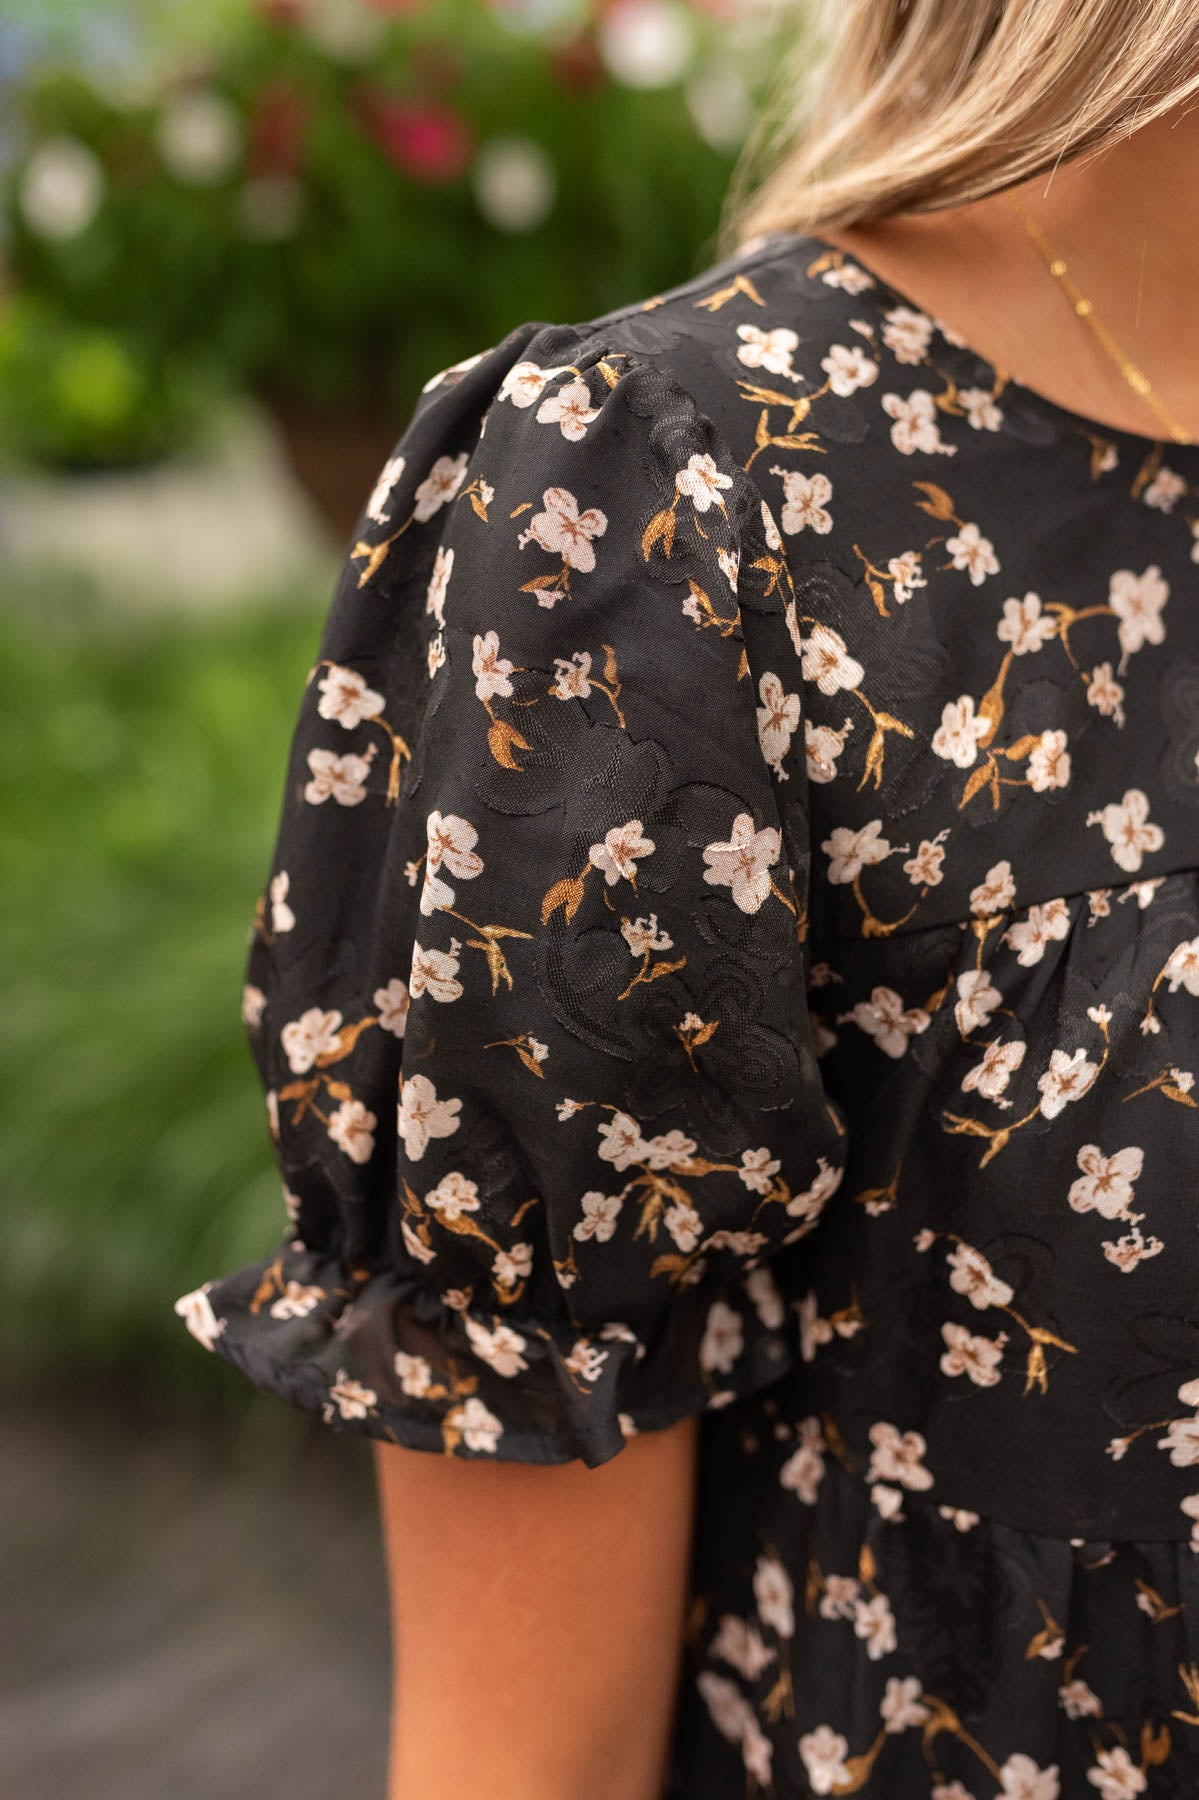 Close up of the floral pattern on the black floral midi dress